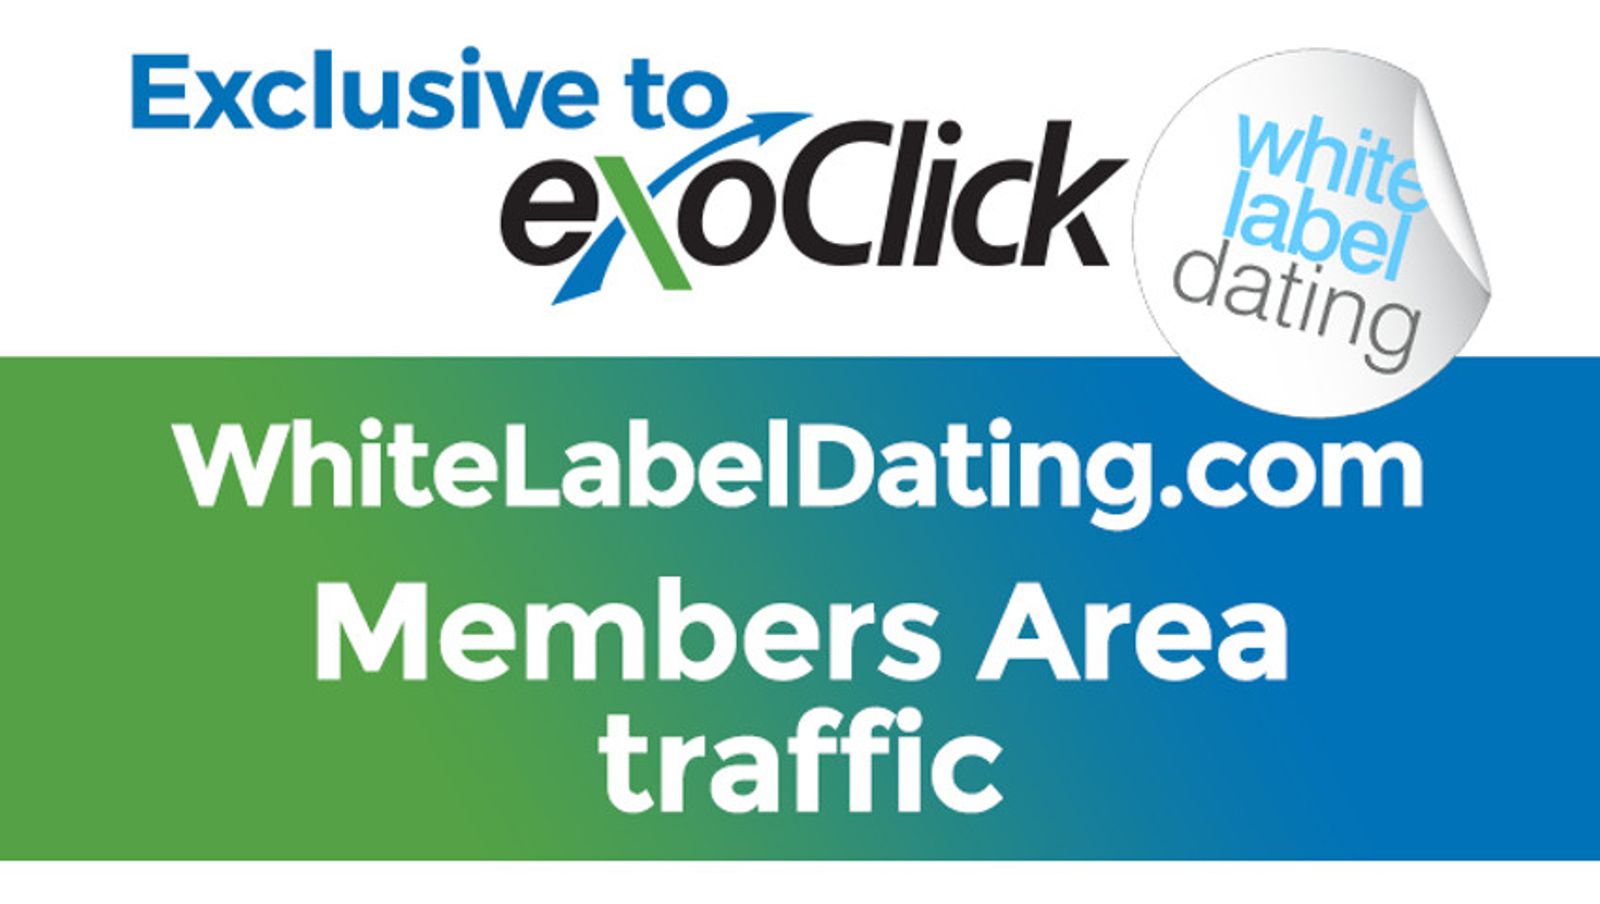 ExoClick Signs Traffic Deal With WhiteLabelDating.com